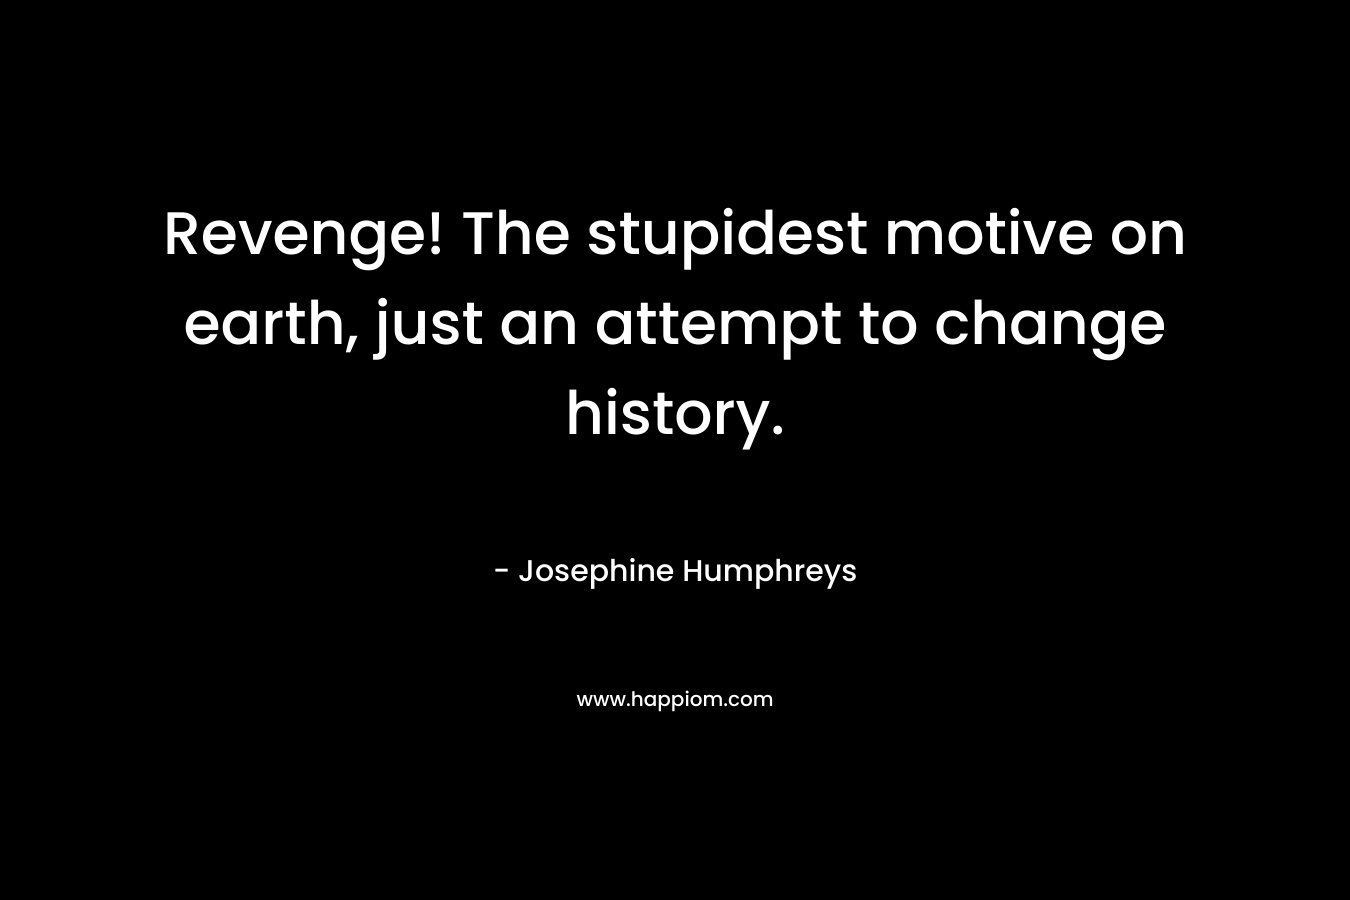 Revenge! The stupidest motive on earth, just an attempt to change history. – Josephine Humphreys